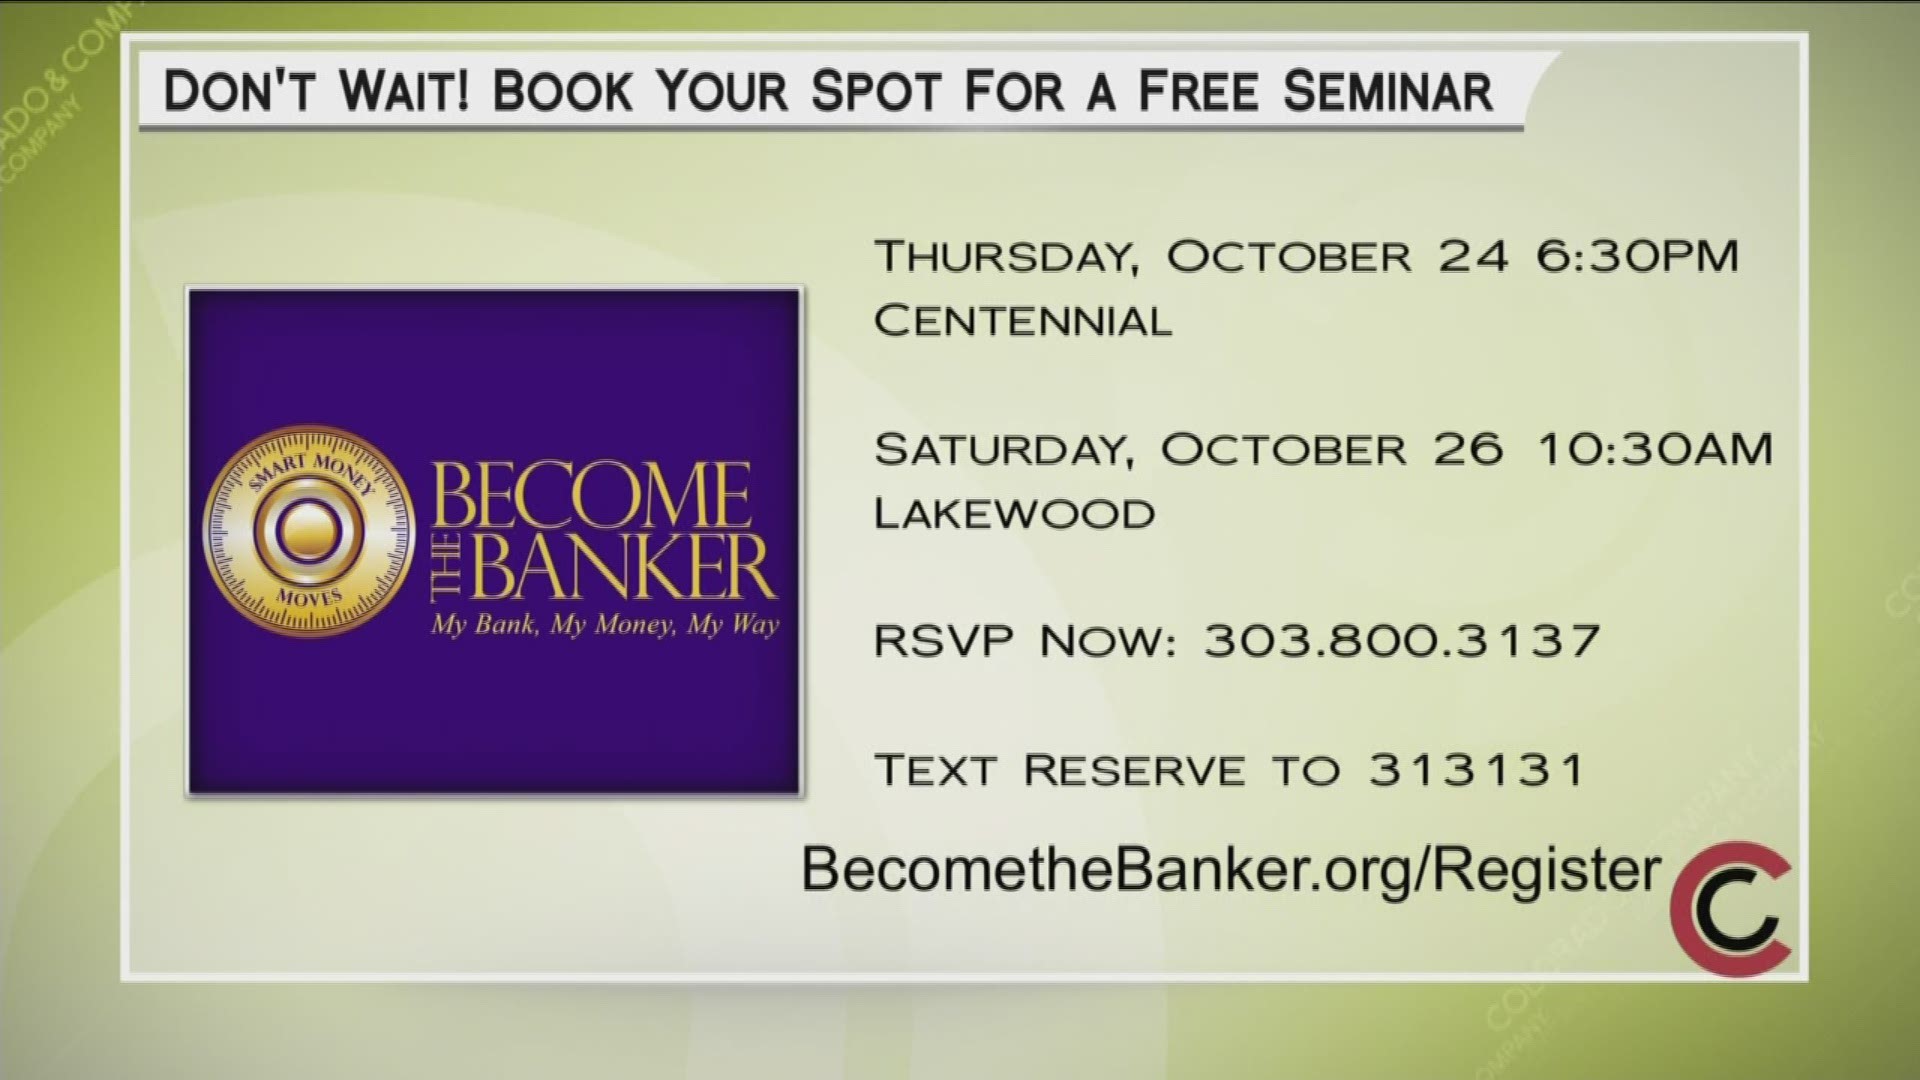 Sign up for an upcoming Become the Banker seminar at www.BecomeTheBanker.org/Register, or text RESERVE to 313131, or by calling 303.800.3137.